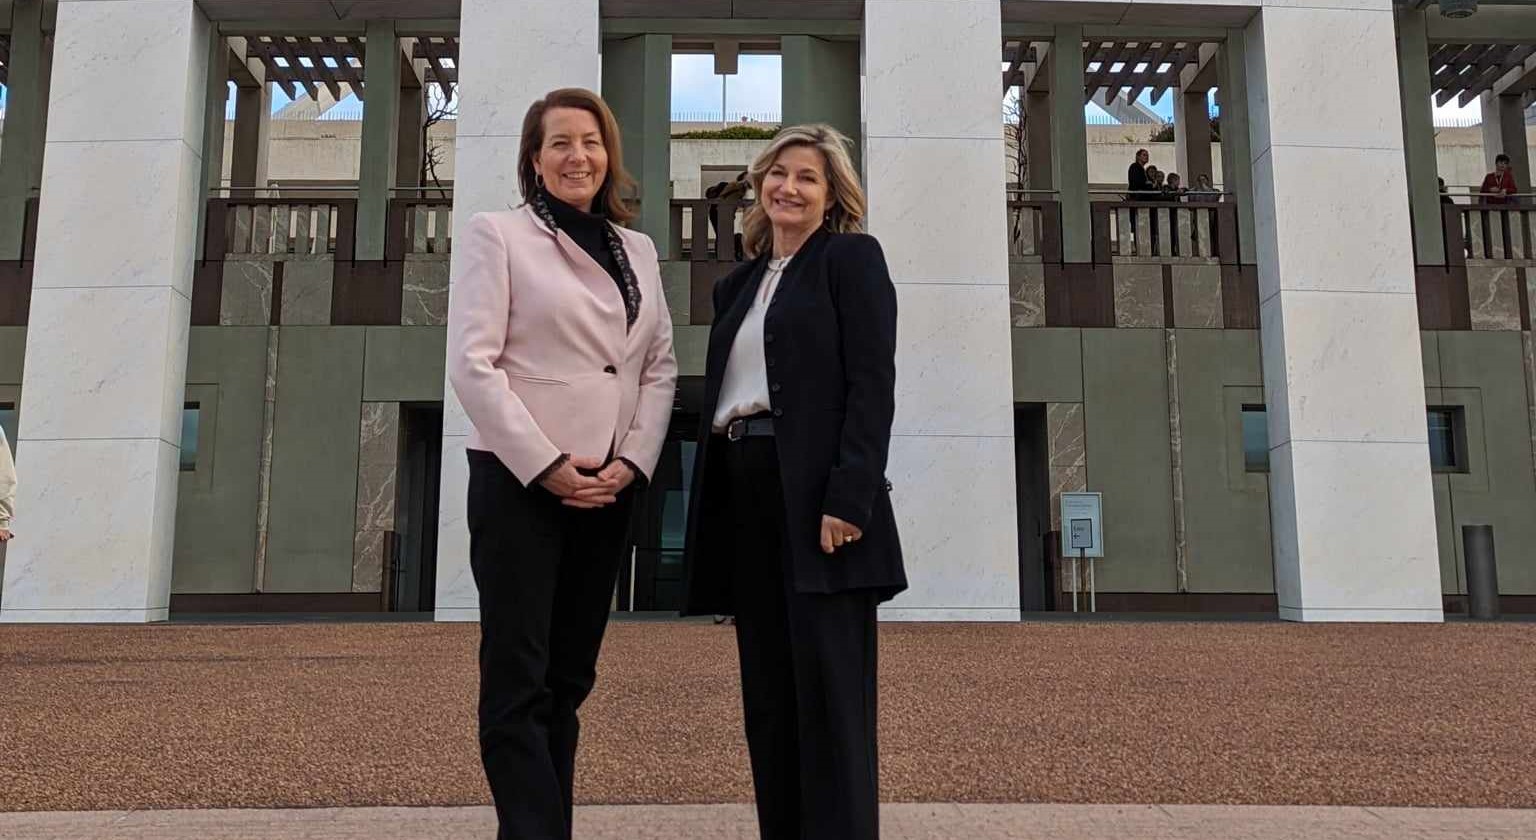 Council leadership team strengthen ties in Canberra